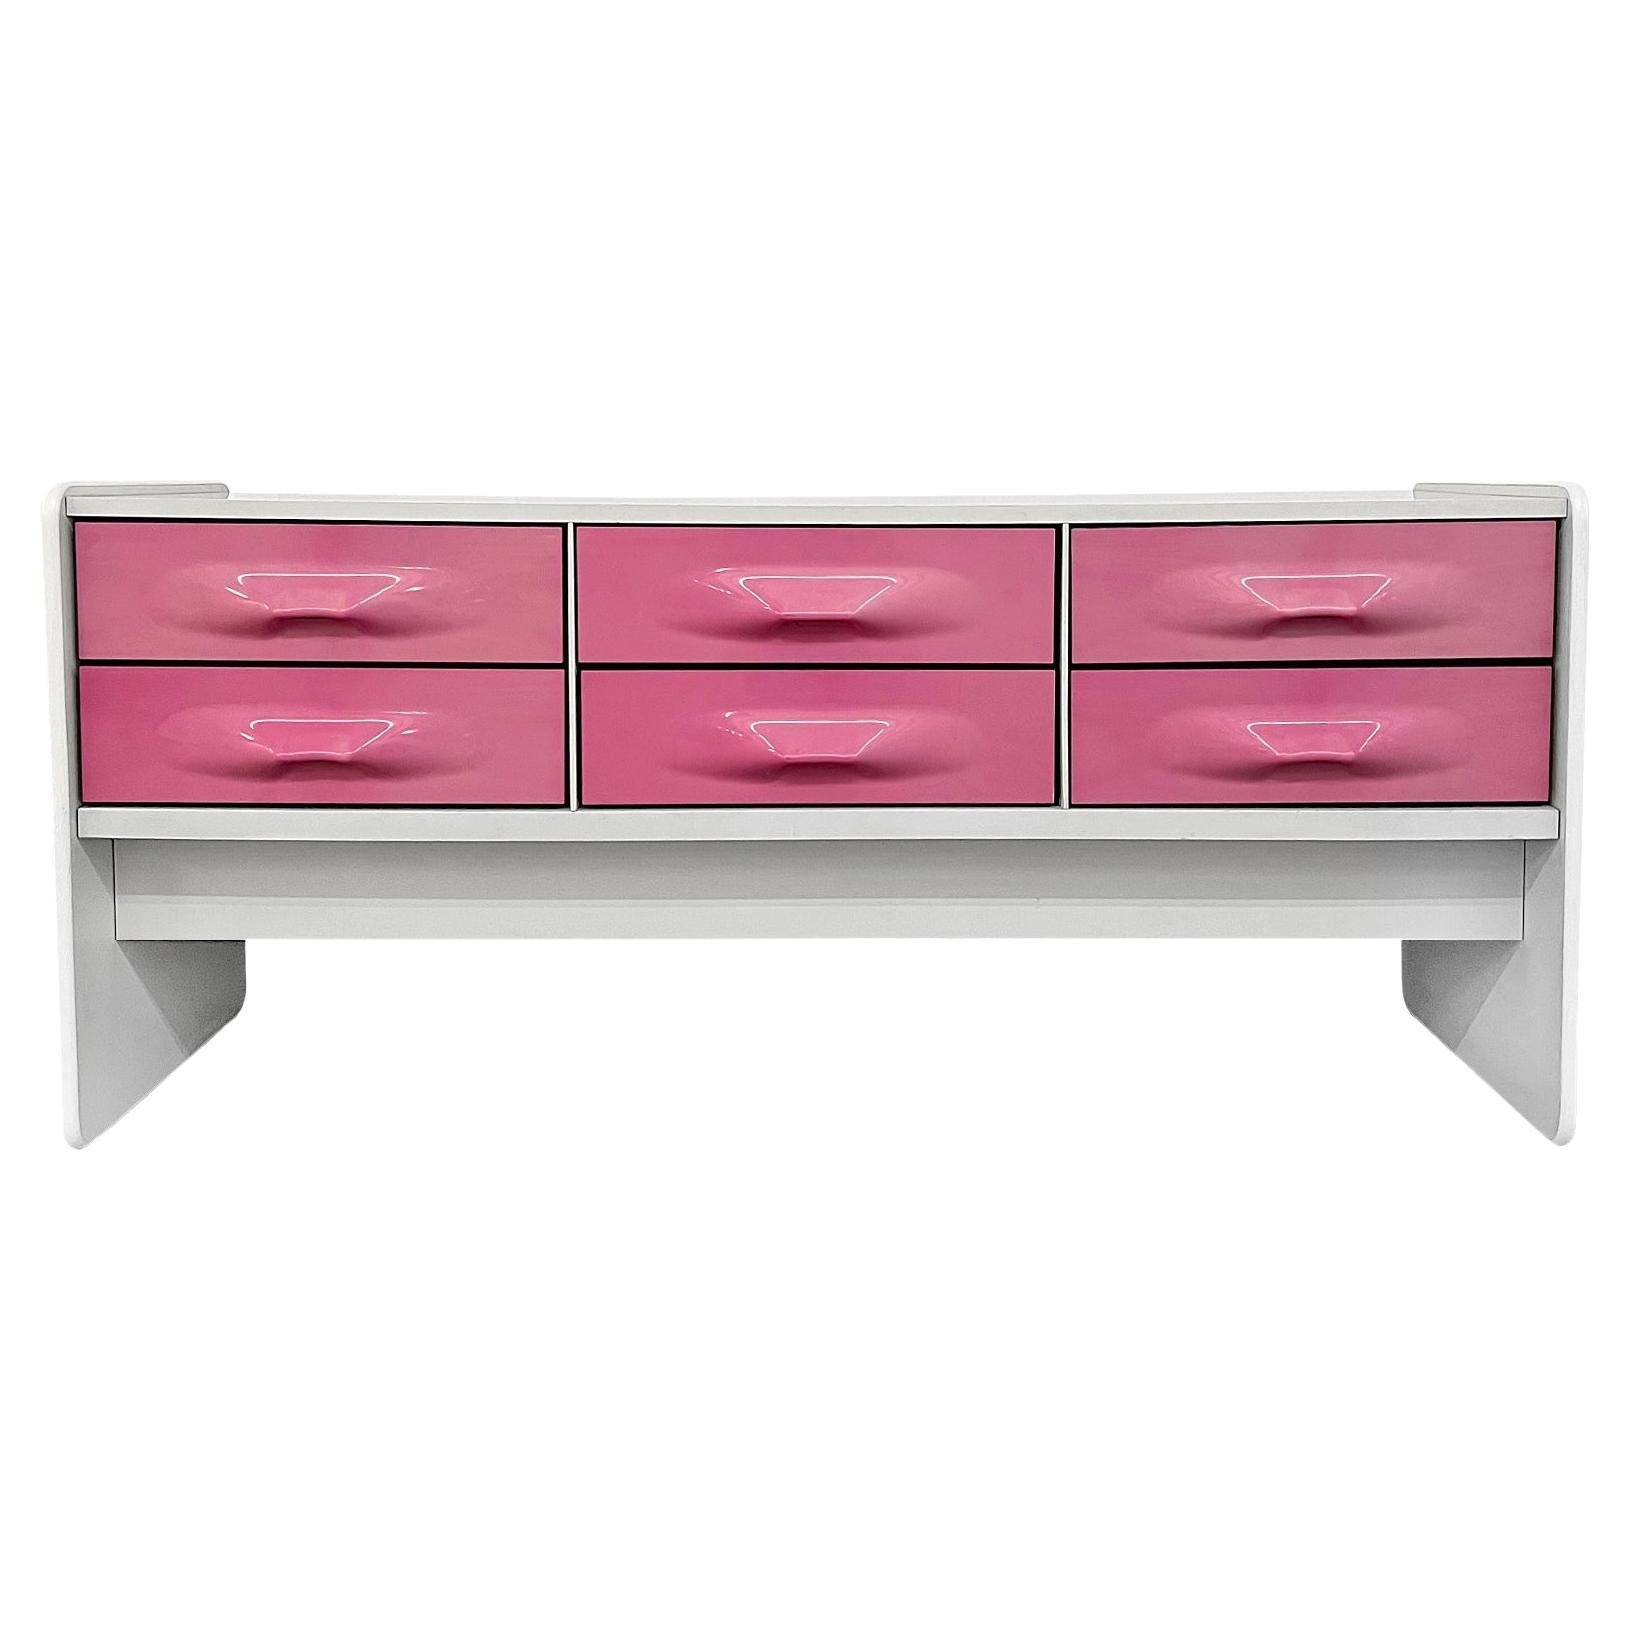 1970's Dresser / Sideboard by Giovanni Maur for Treco, Quebec, Canada